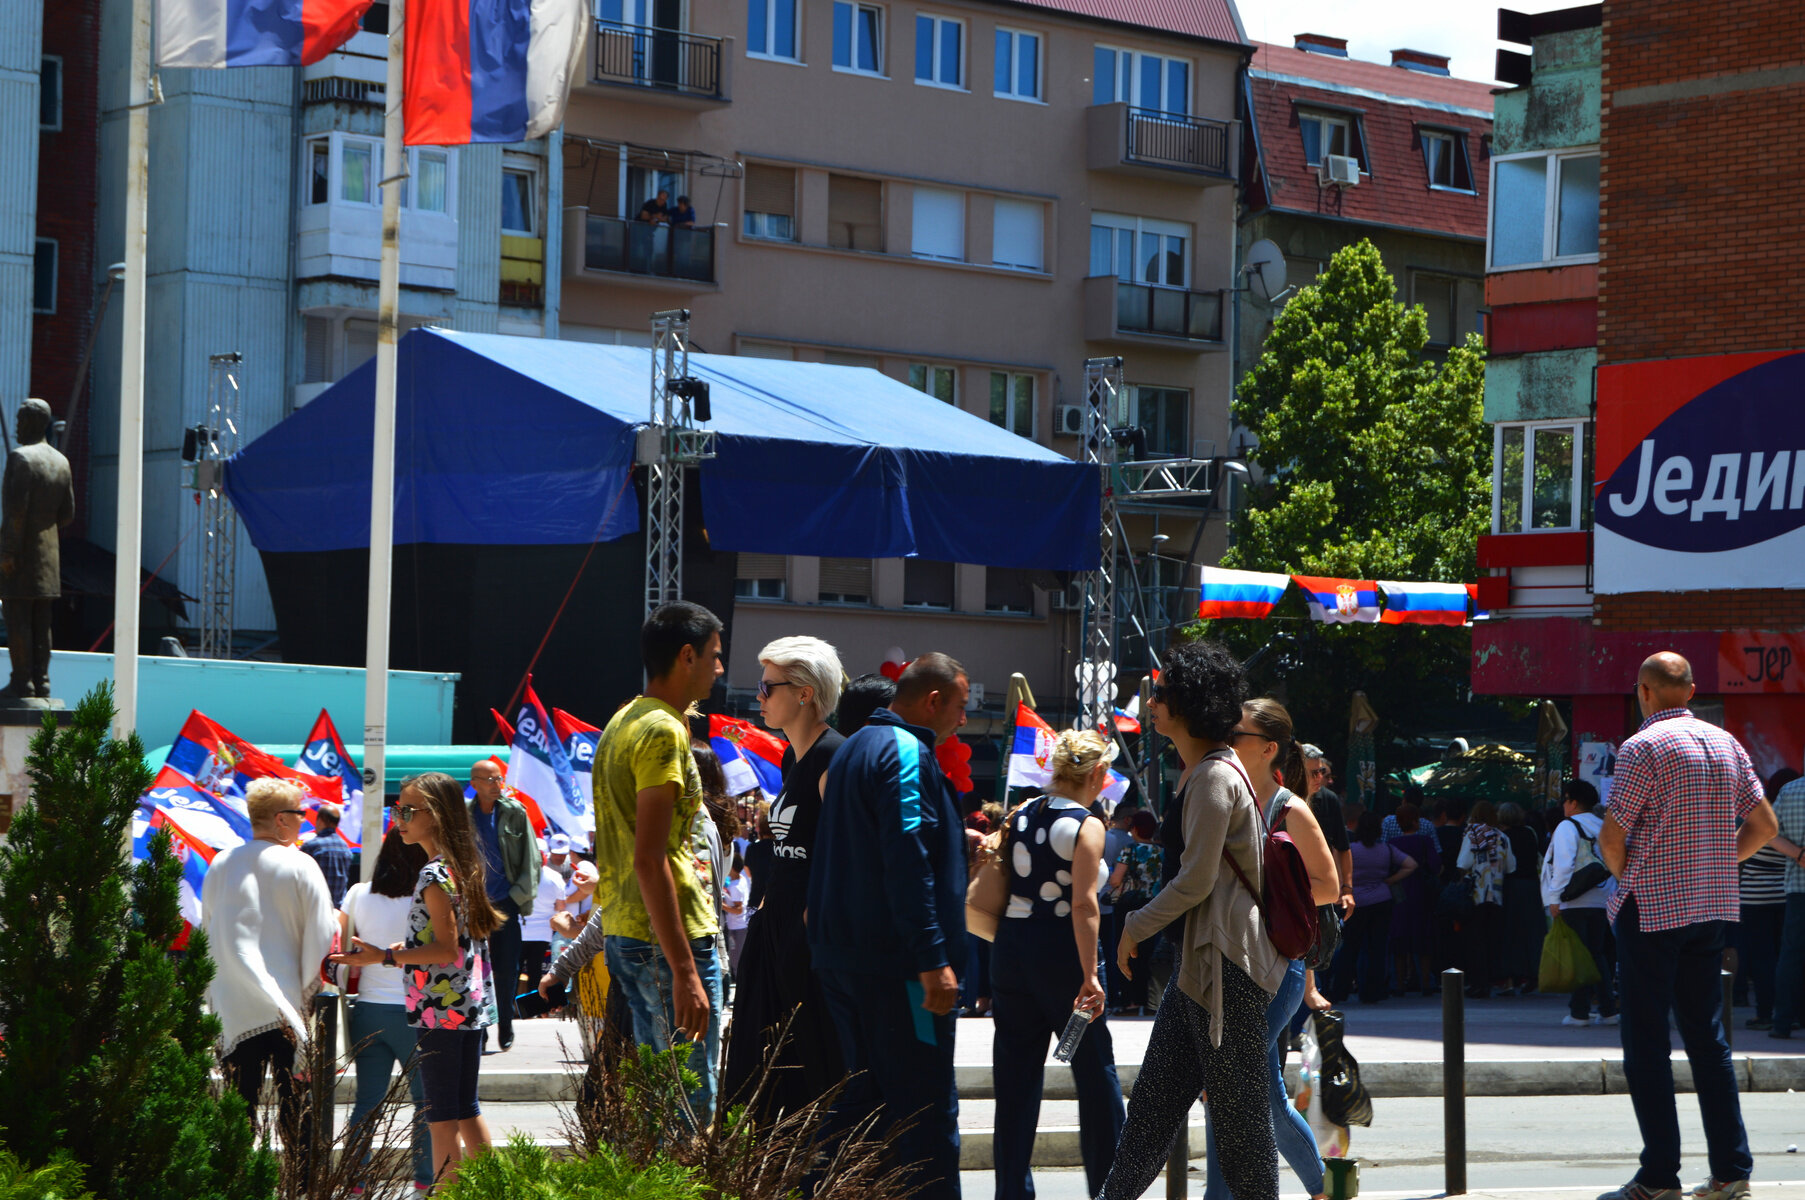 Kosovar Serbs gather at an election rally for Srpska Lista, the Belgrade-backed, pro-Serbia political party.